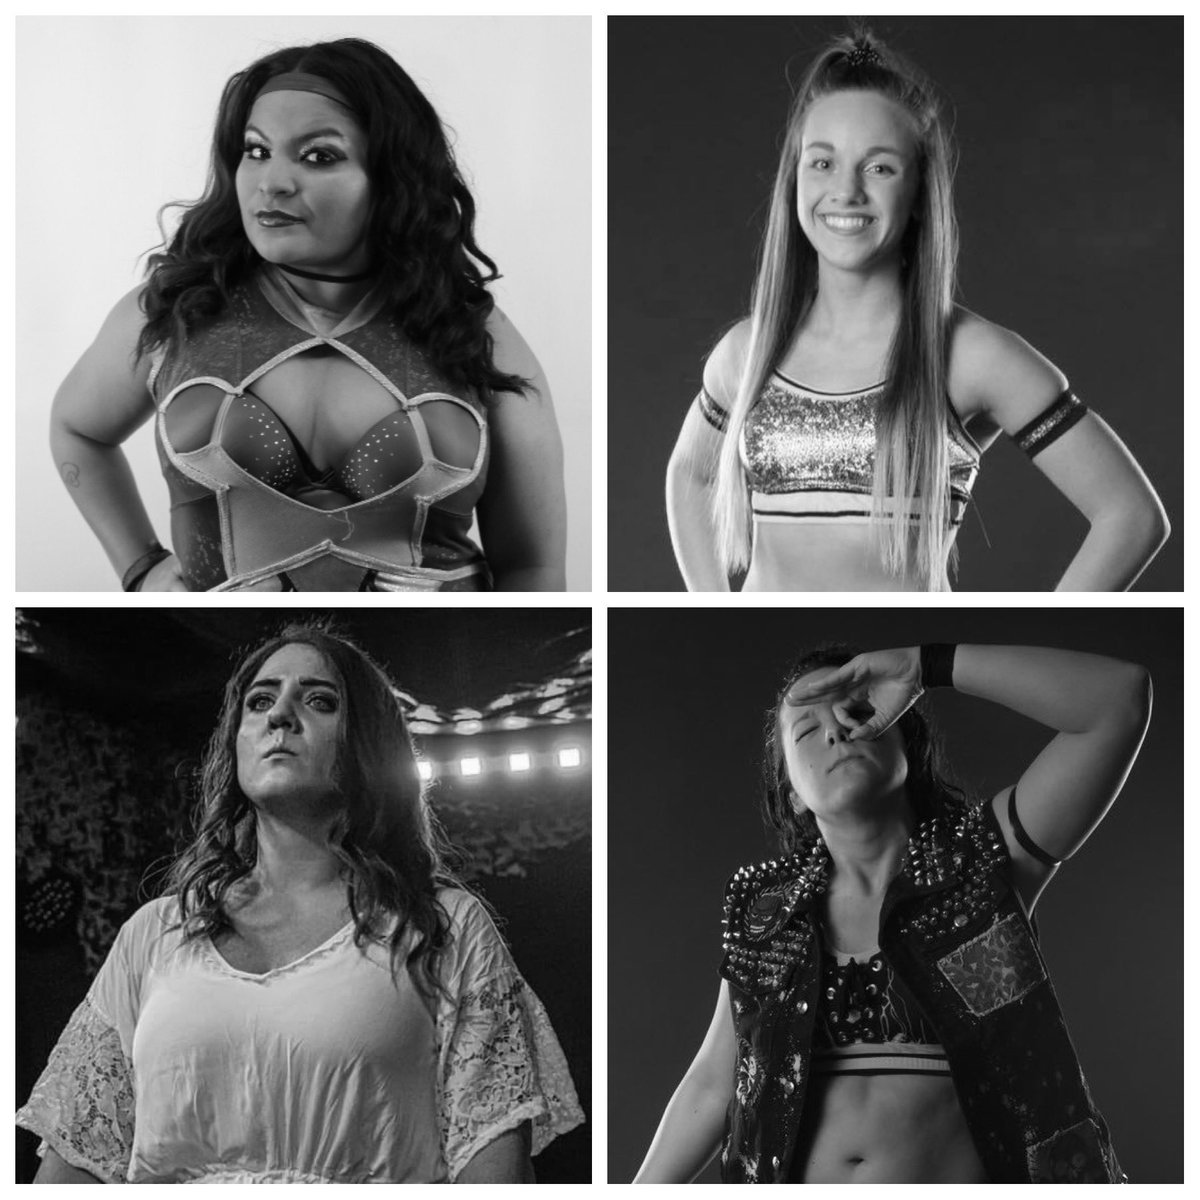 The ladies return on April 4th for Nobody’s Fool in Lima, Ohio at the Bradfield Community Center. You will see in action @PalomaStarr , @NikkiVictory3 , @JexyRocks , Salena Dean Advance tickets on sale now at warwrestling.com